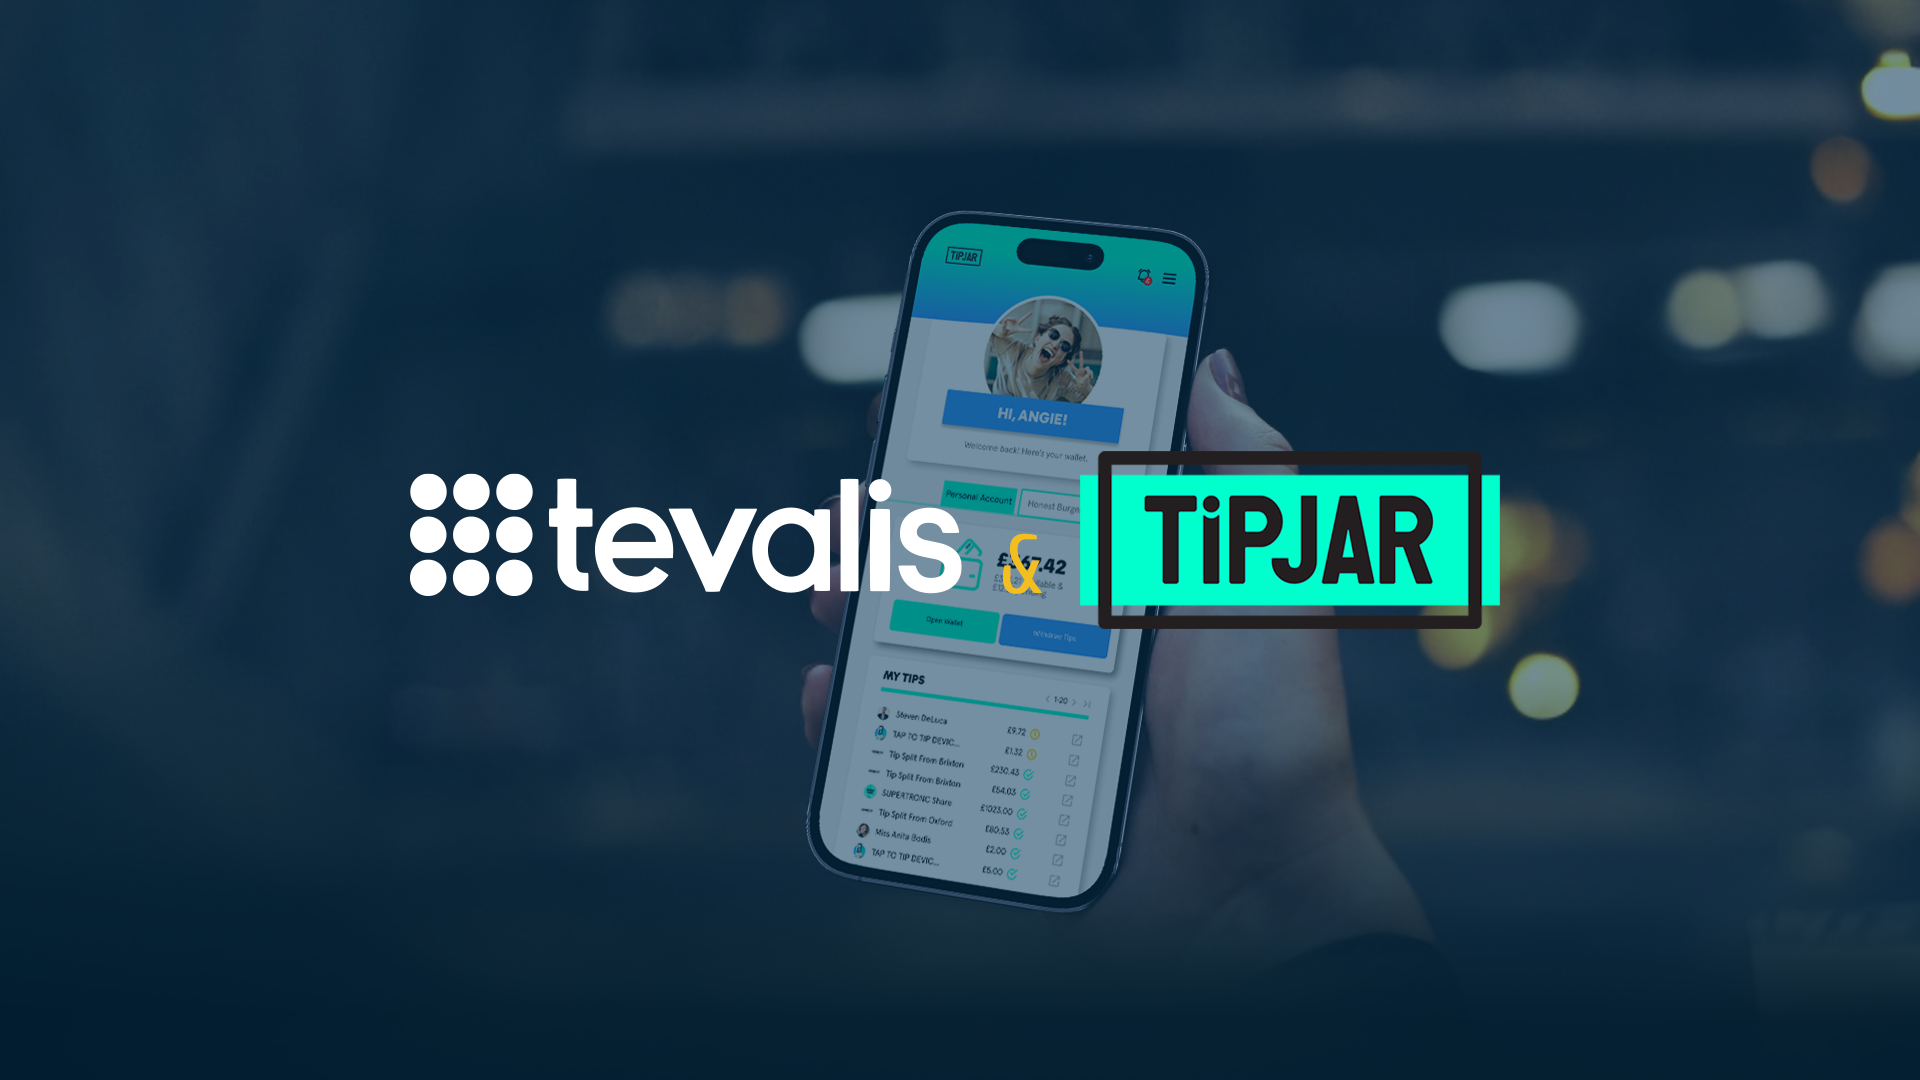 Ask The Expert Image - Tevalis and Tipjar